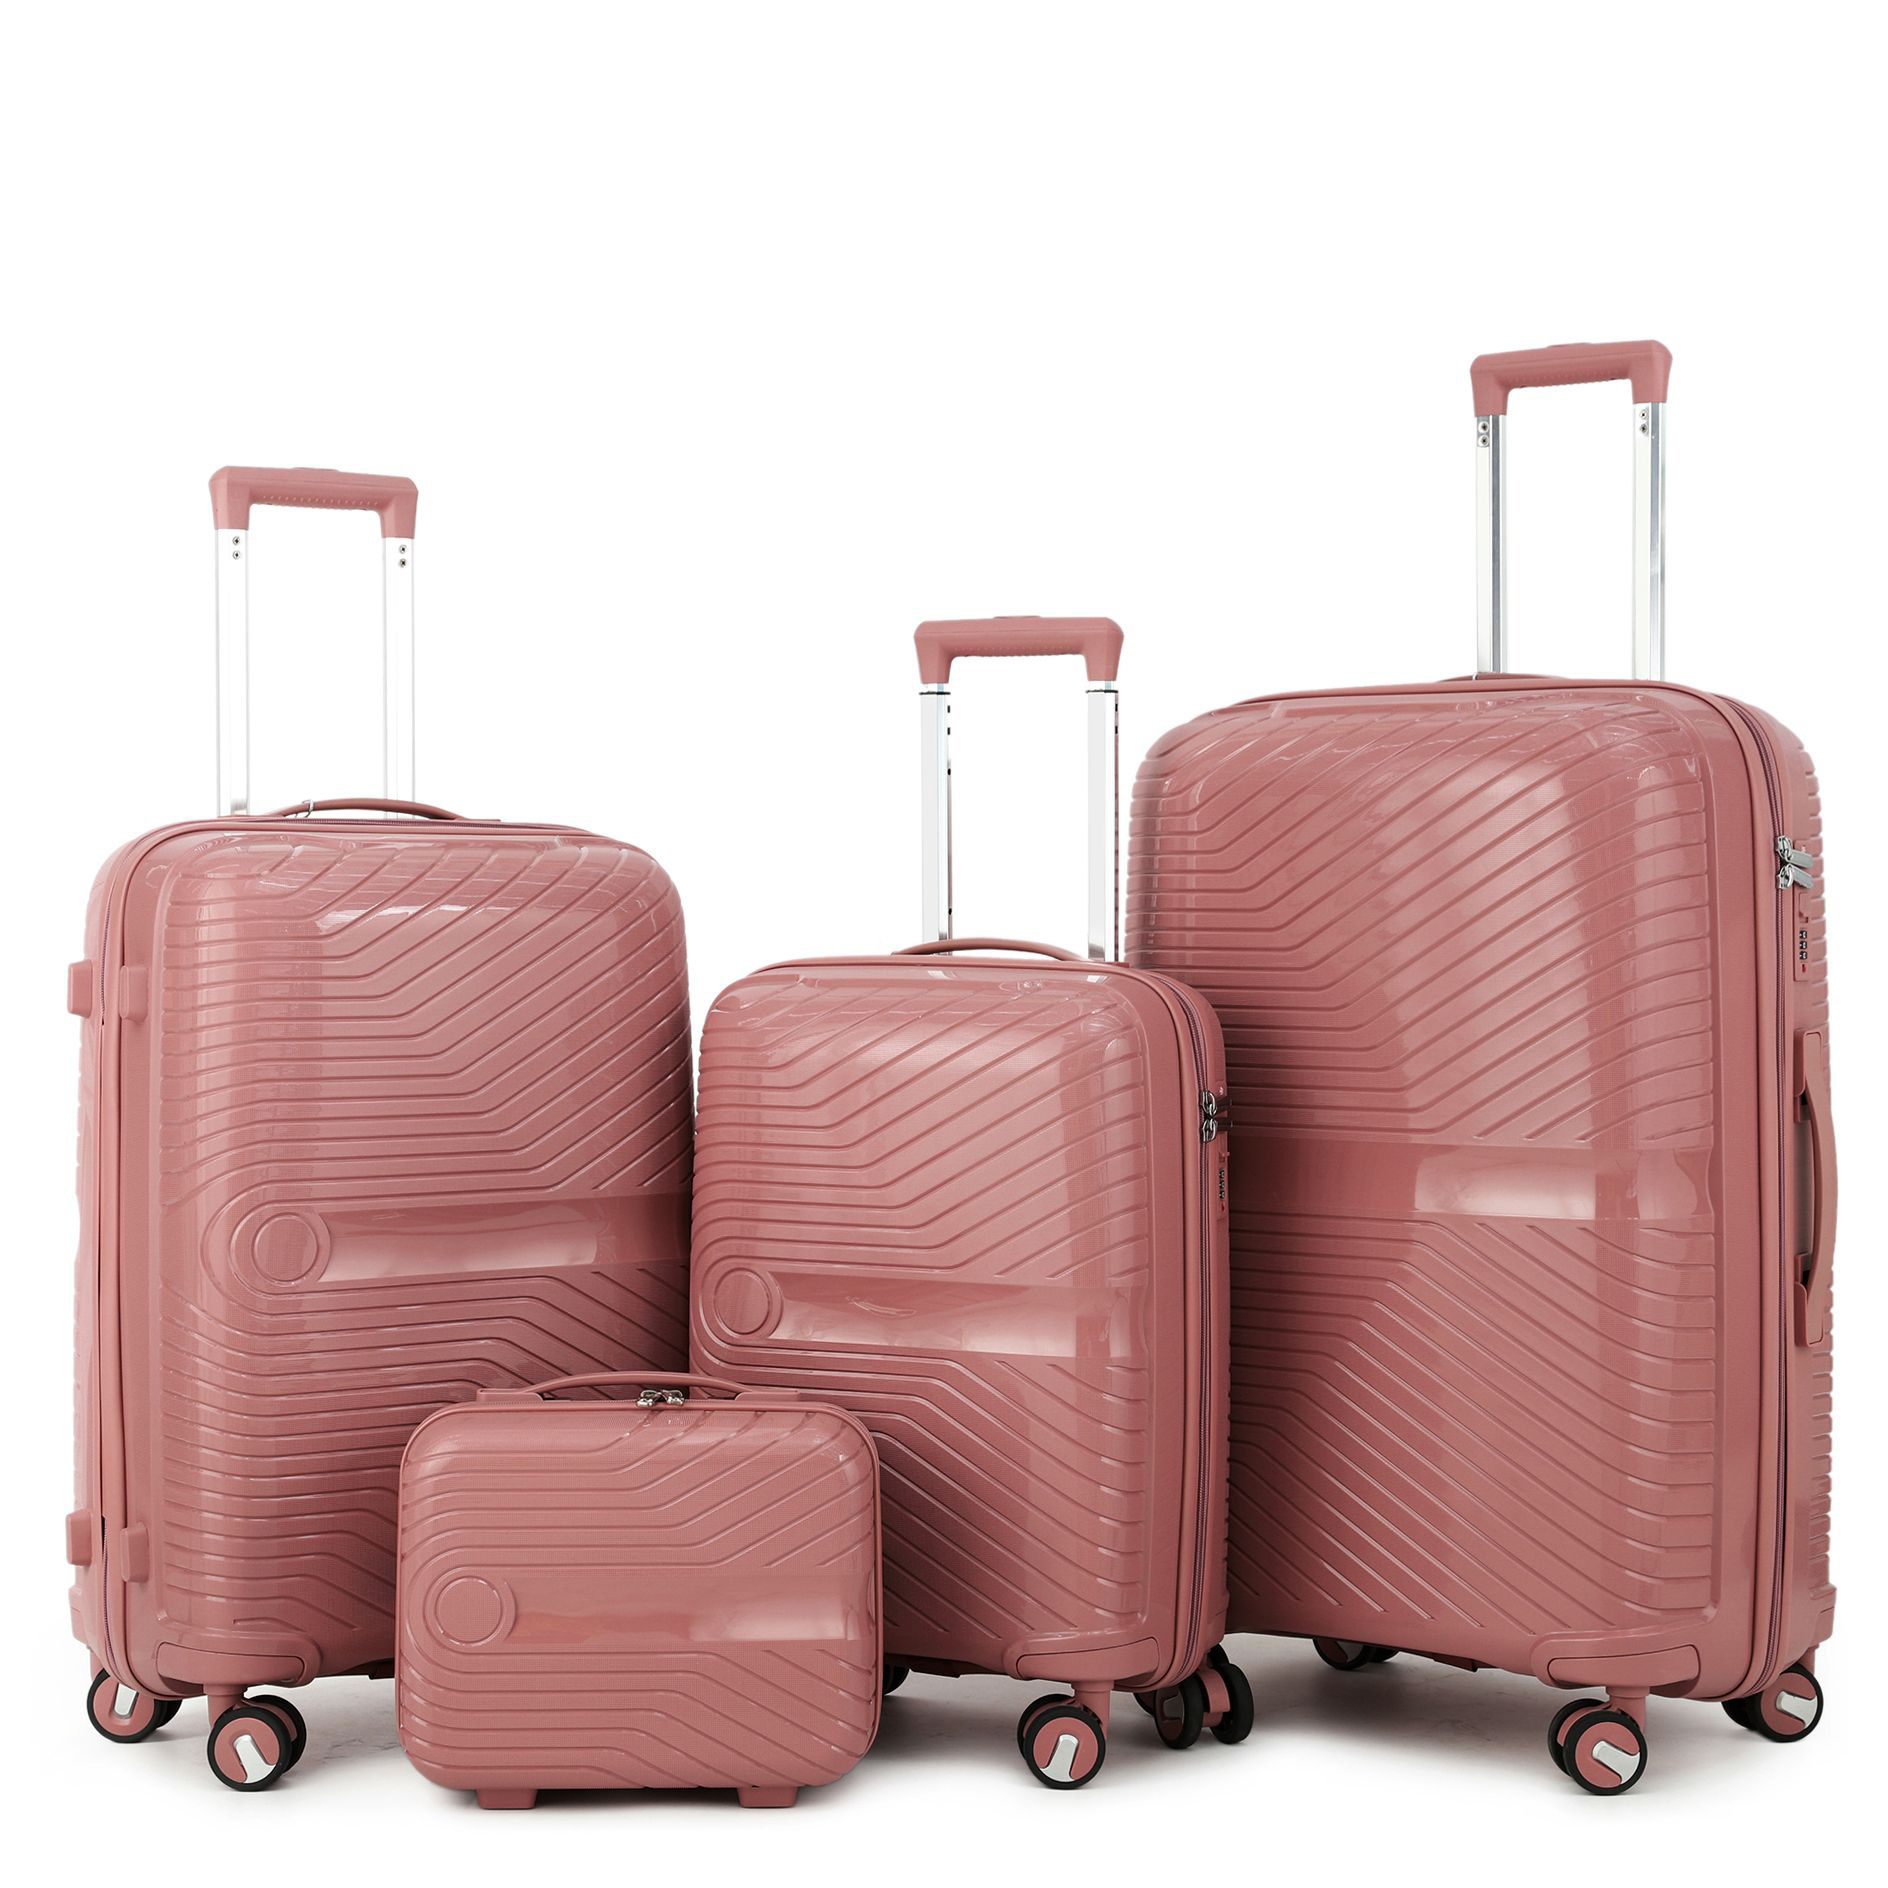 Source Manufacturers Produce Foreign Trade Trolley Case Macaron Color Series Suitcase Storage Luggage Four-Piece Luggage Set